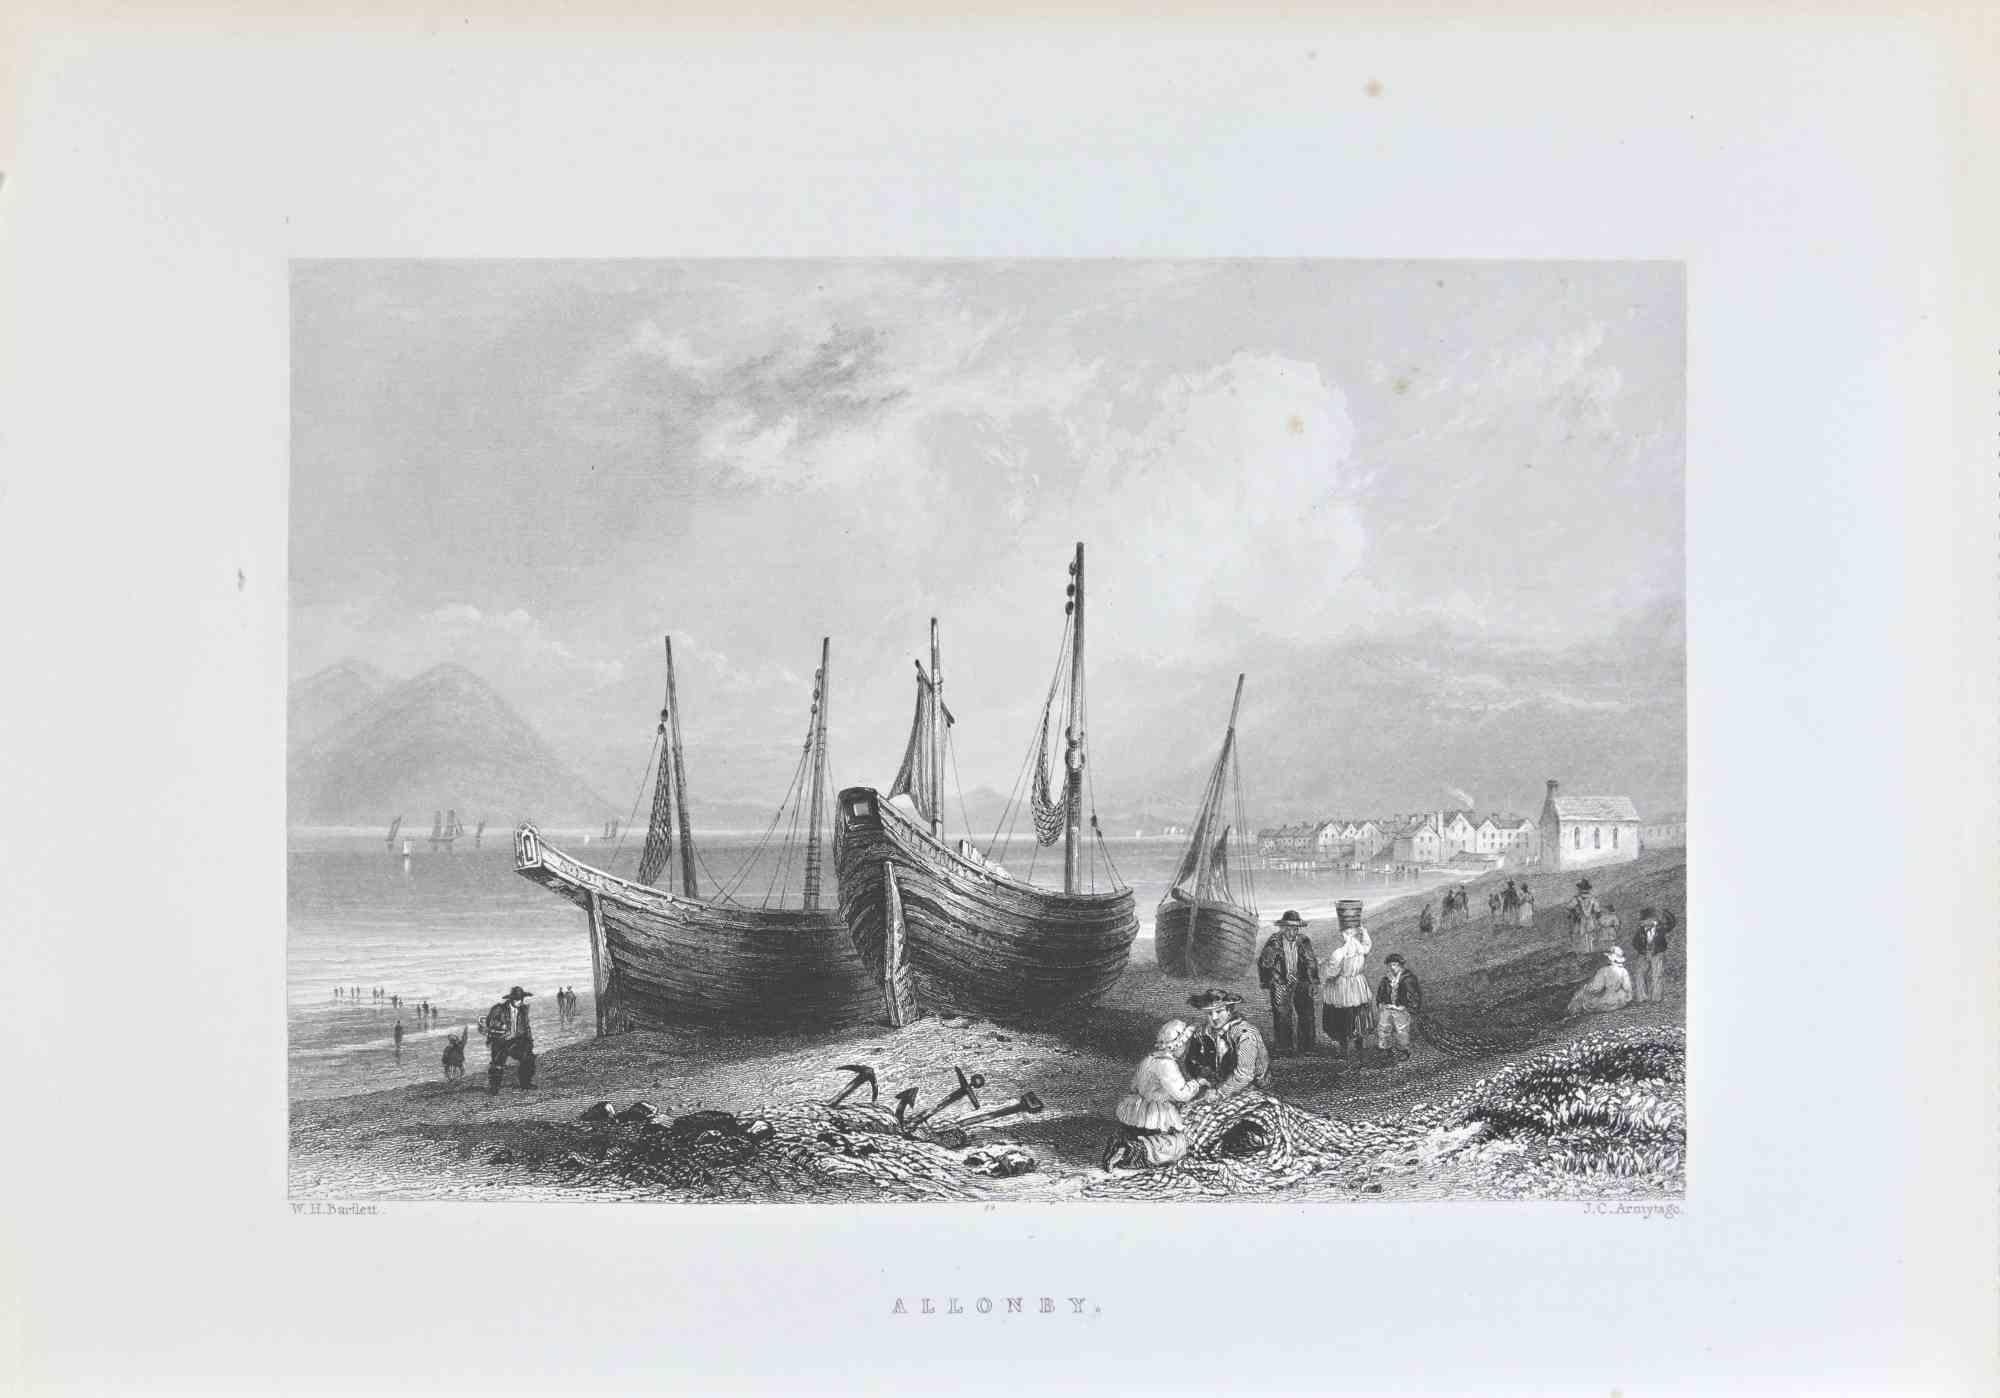 Allonby - Etching by W. H.Bartlett - 1845